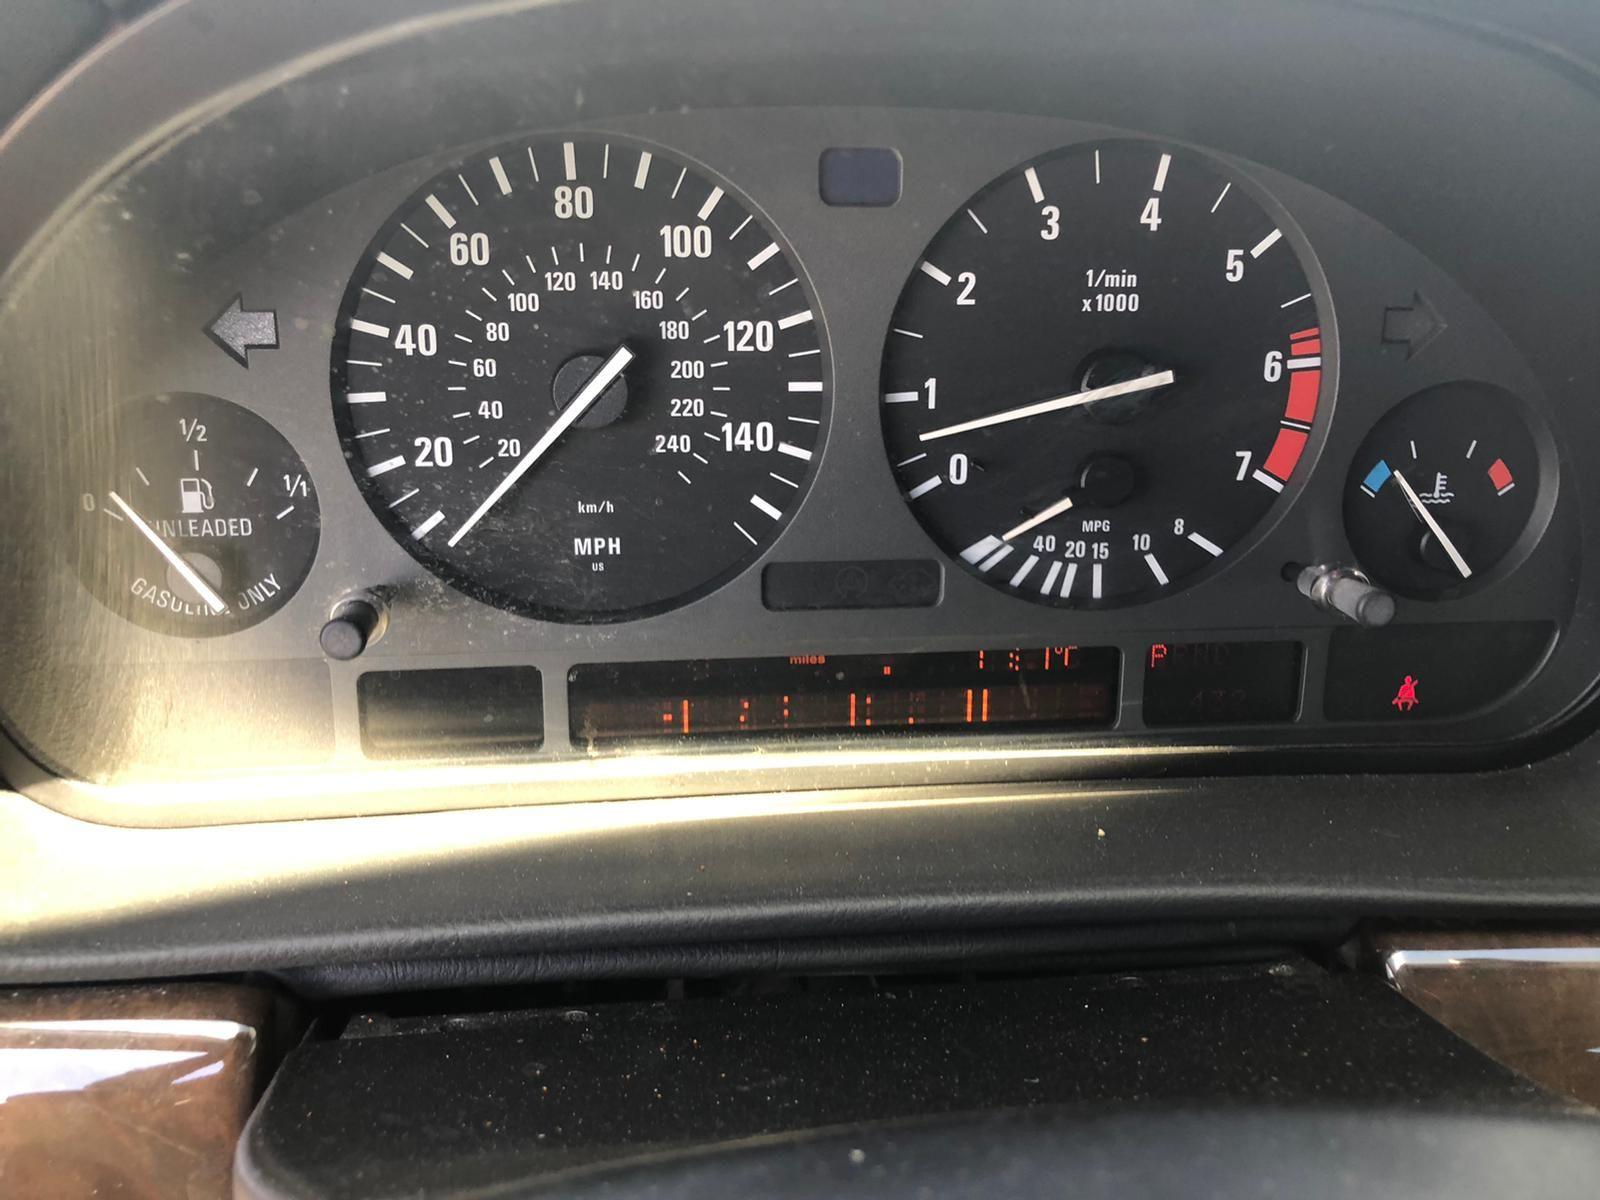 1998 BMW 740i, it has title and it runs.